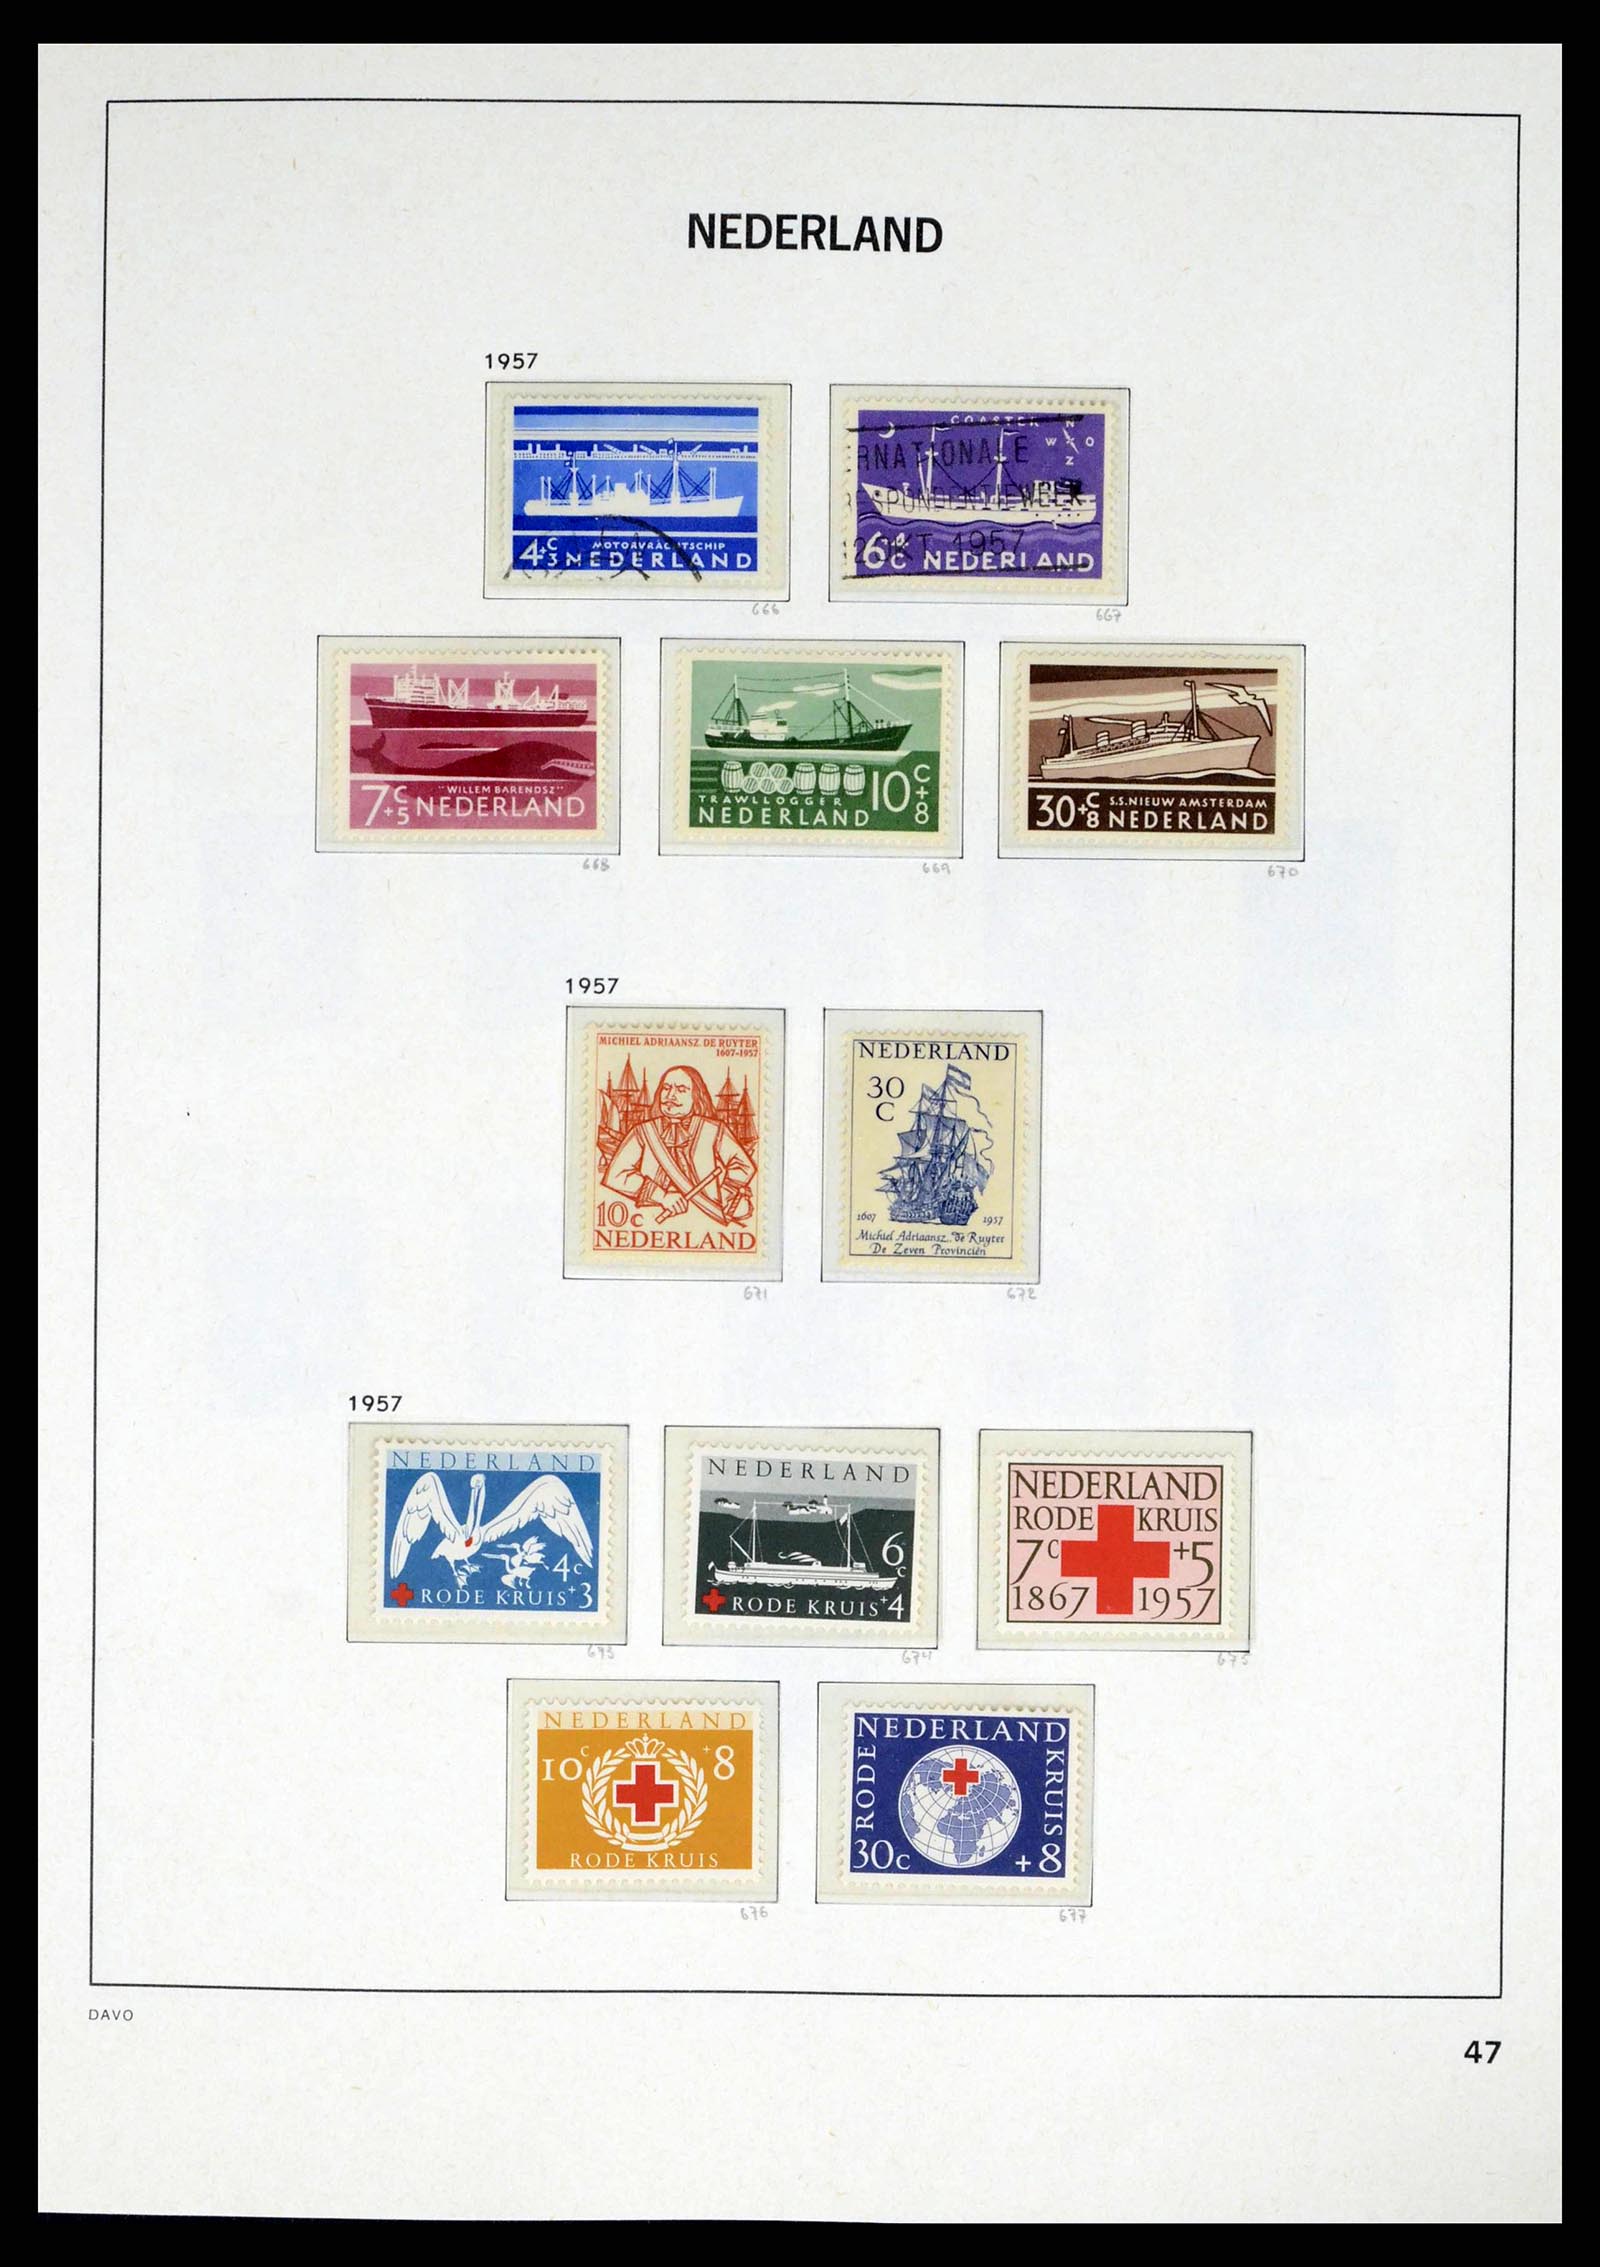 38174 0047 - Stamp collection 38174 Netherlands 1852-2015.